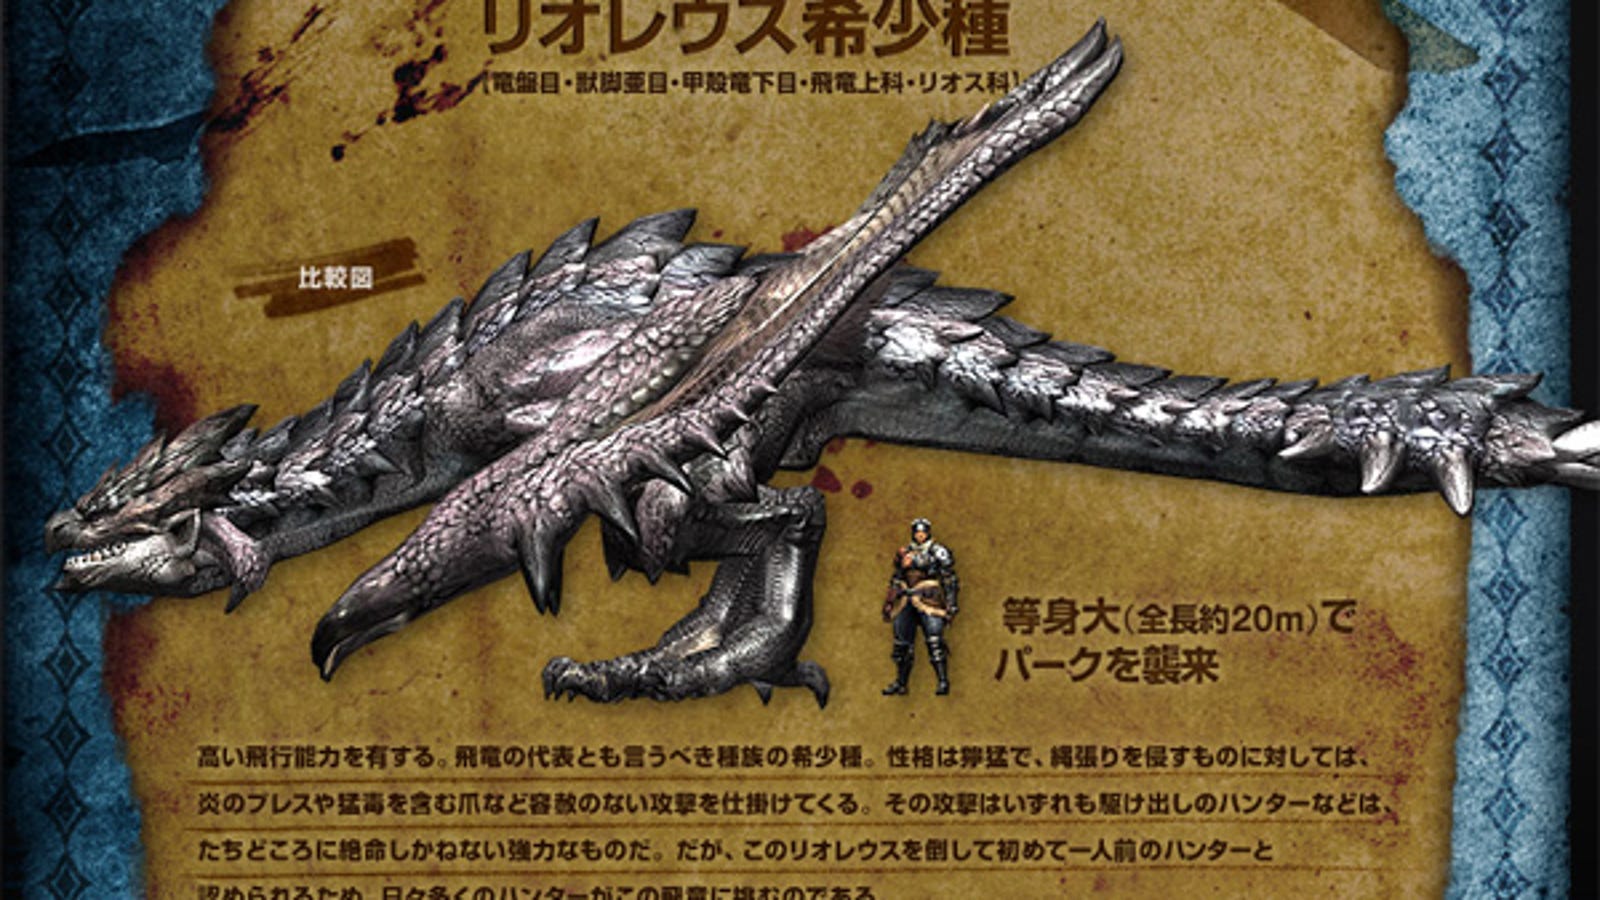 How Big Are LifeSize Monster Hunter Monsters?